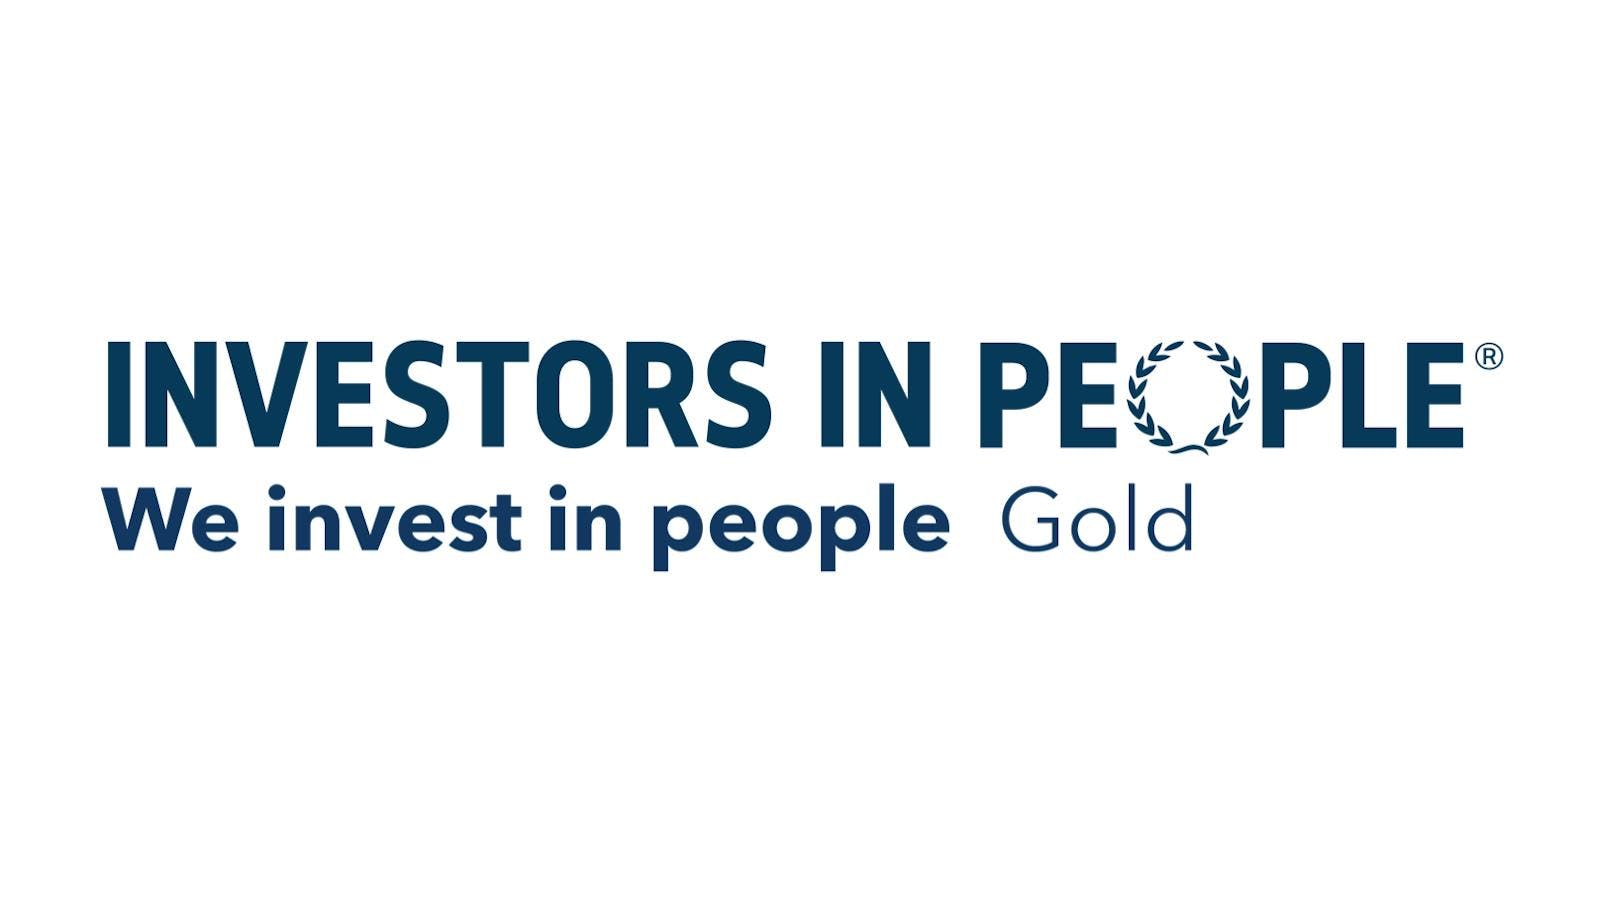 Investors in People - We Invest in People - Gold Award